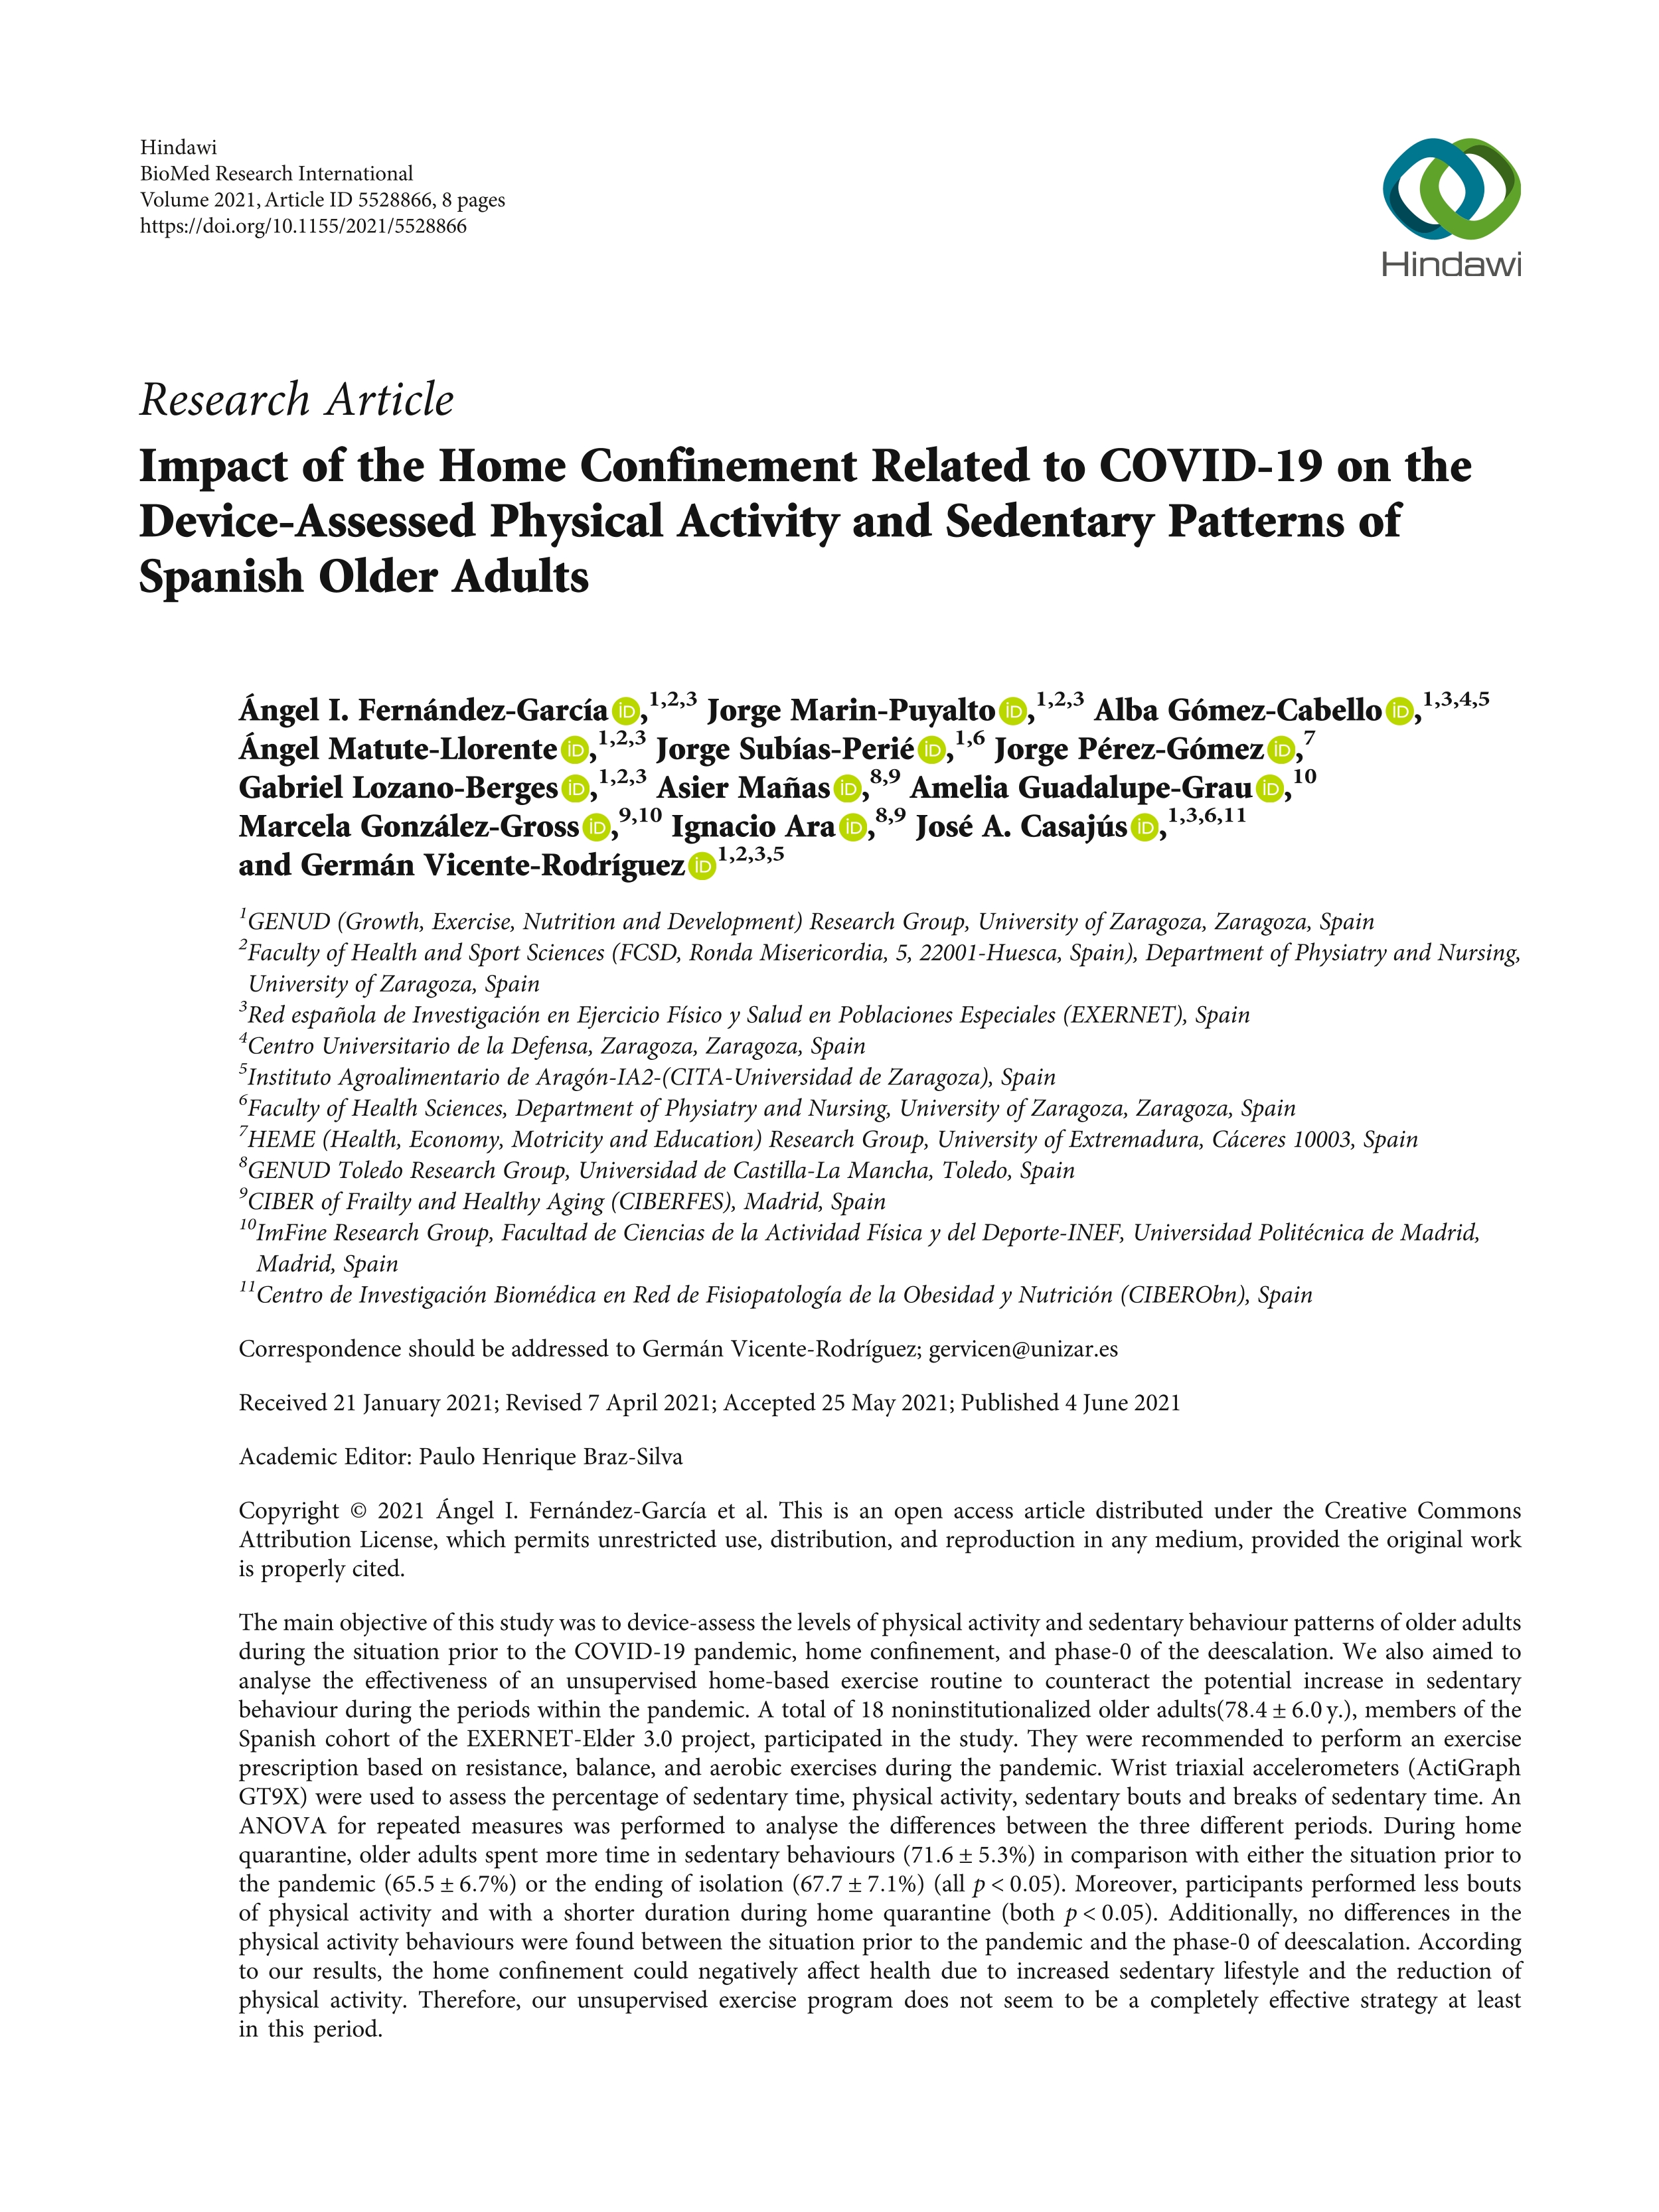 Impact of the home confinement related to covid-19 on the device-assessed physical activity and sedentary aatterns of spanish older adults